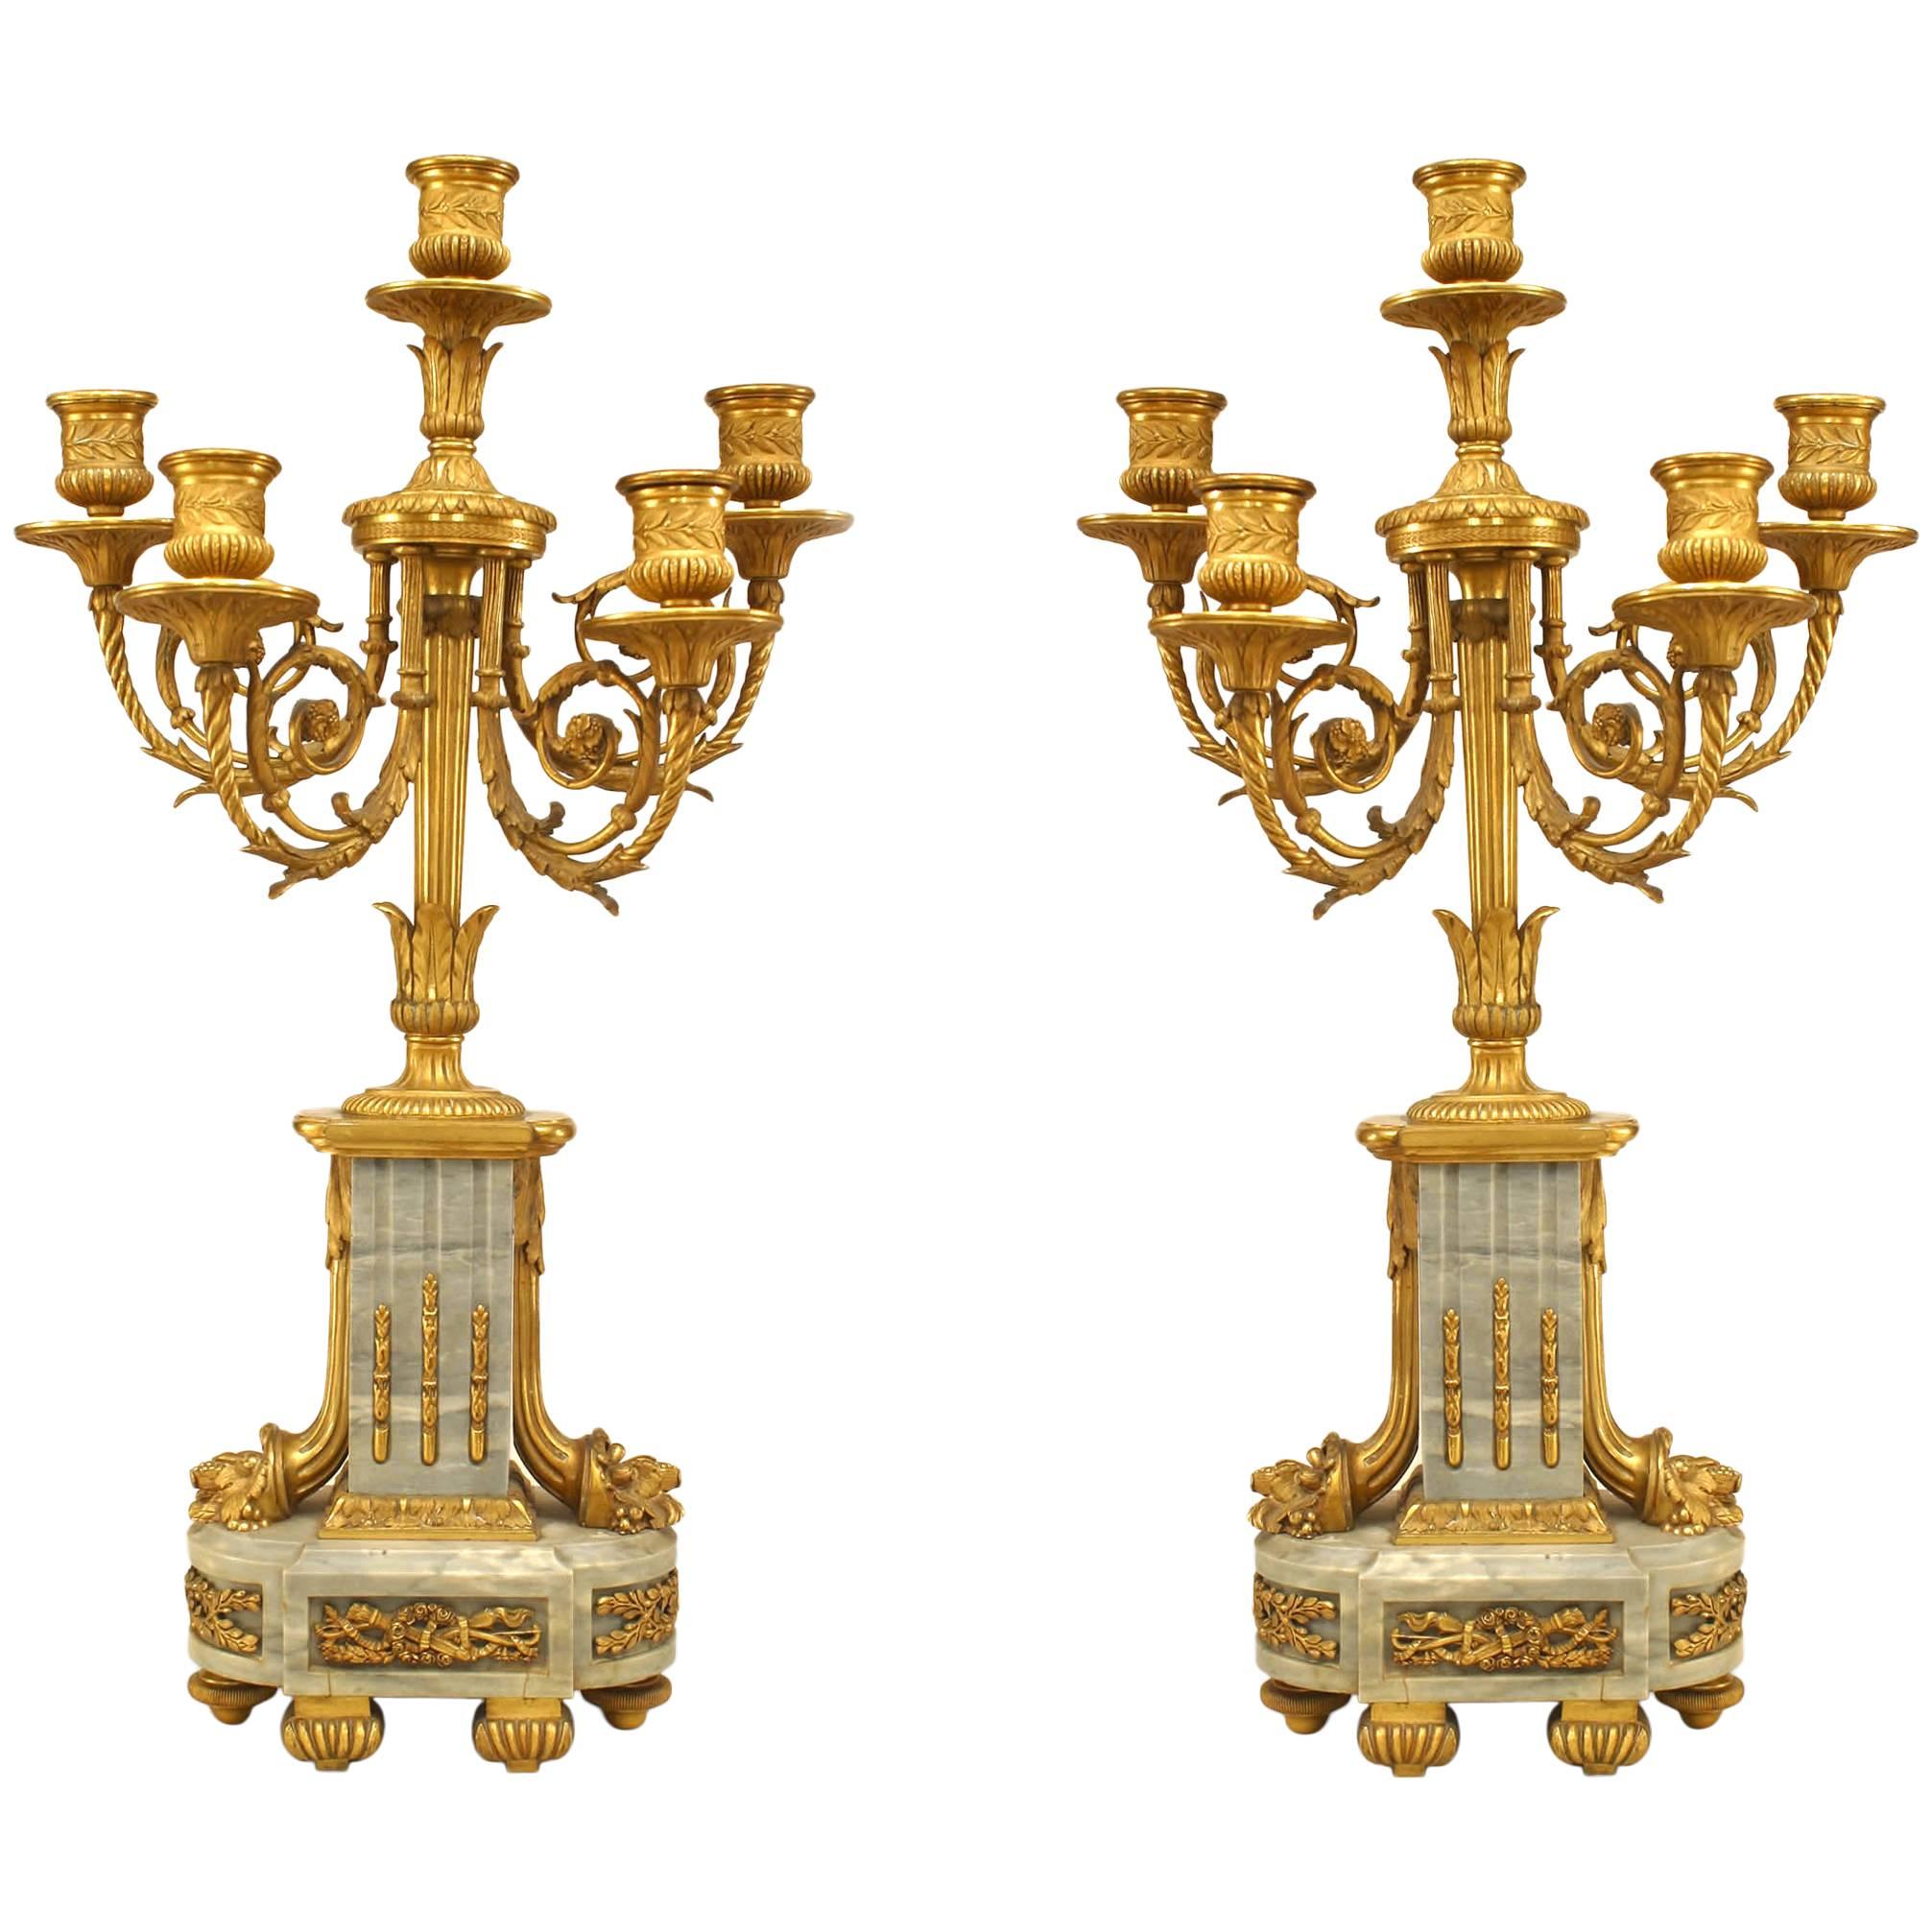 Pair of French Louis XVI Style Gilt Bronze and Marble Candelabras For Sale